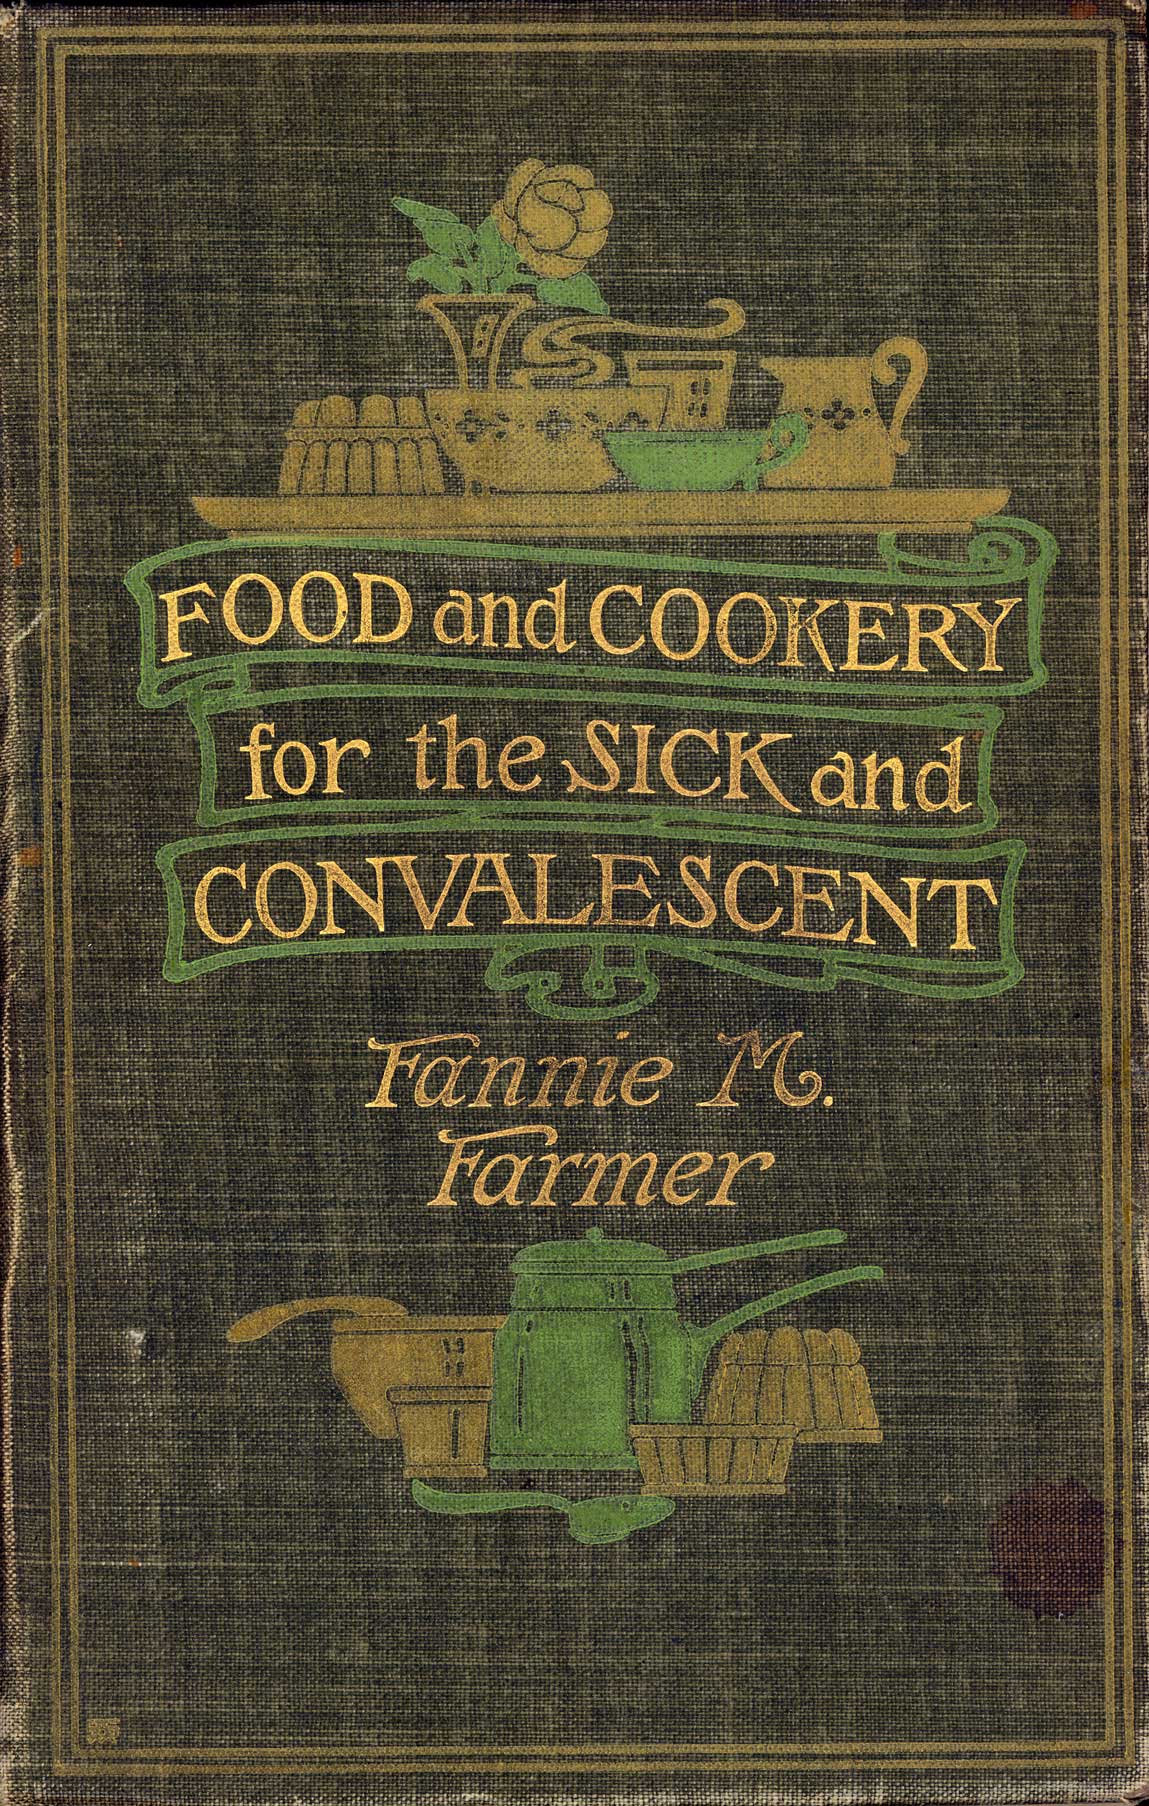 Food and cookery for the sick and convalescent